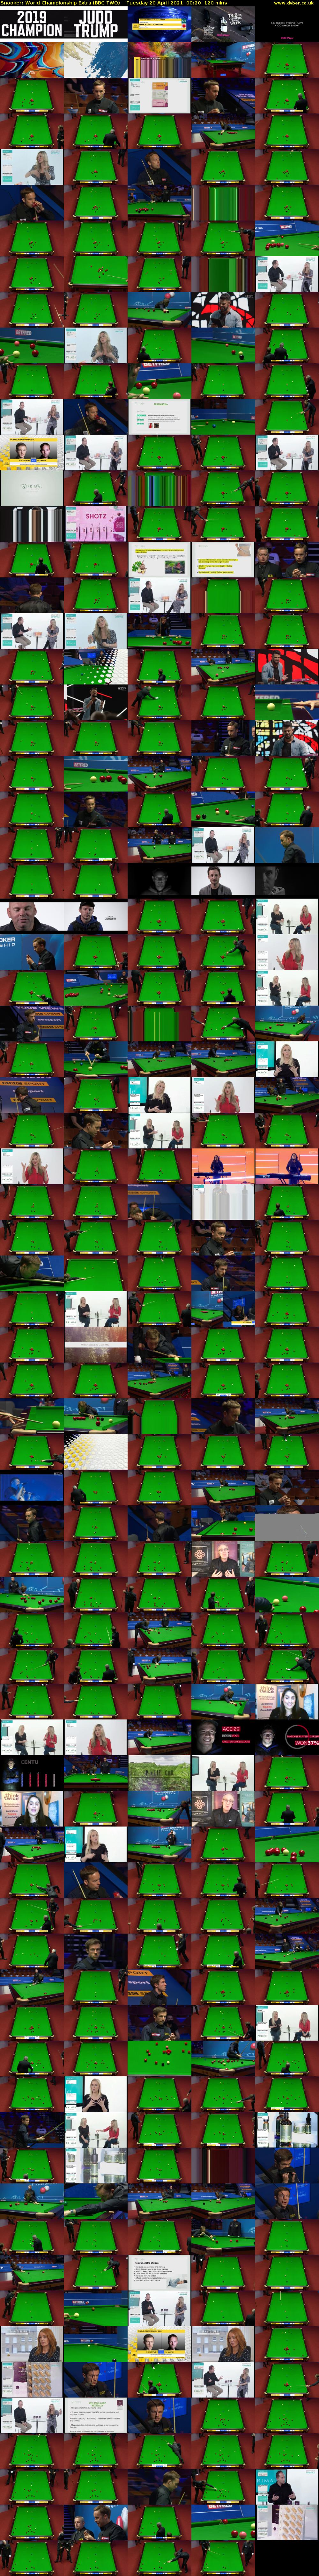 Snooker: World Championship Extra (BBC TWO) Tuesday 20 April 2021 00:20 - 02:20